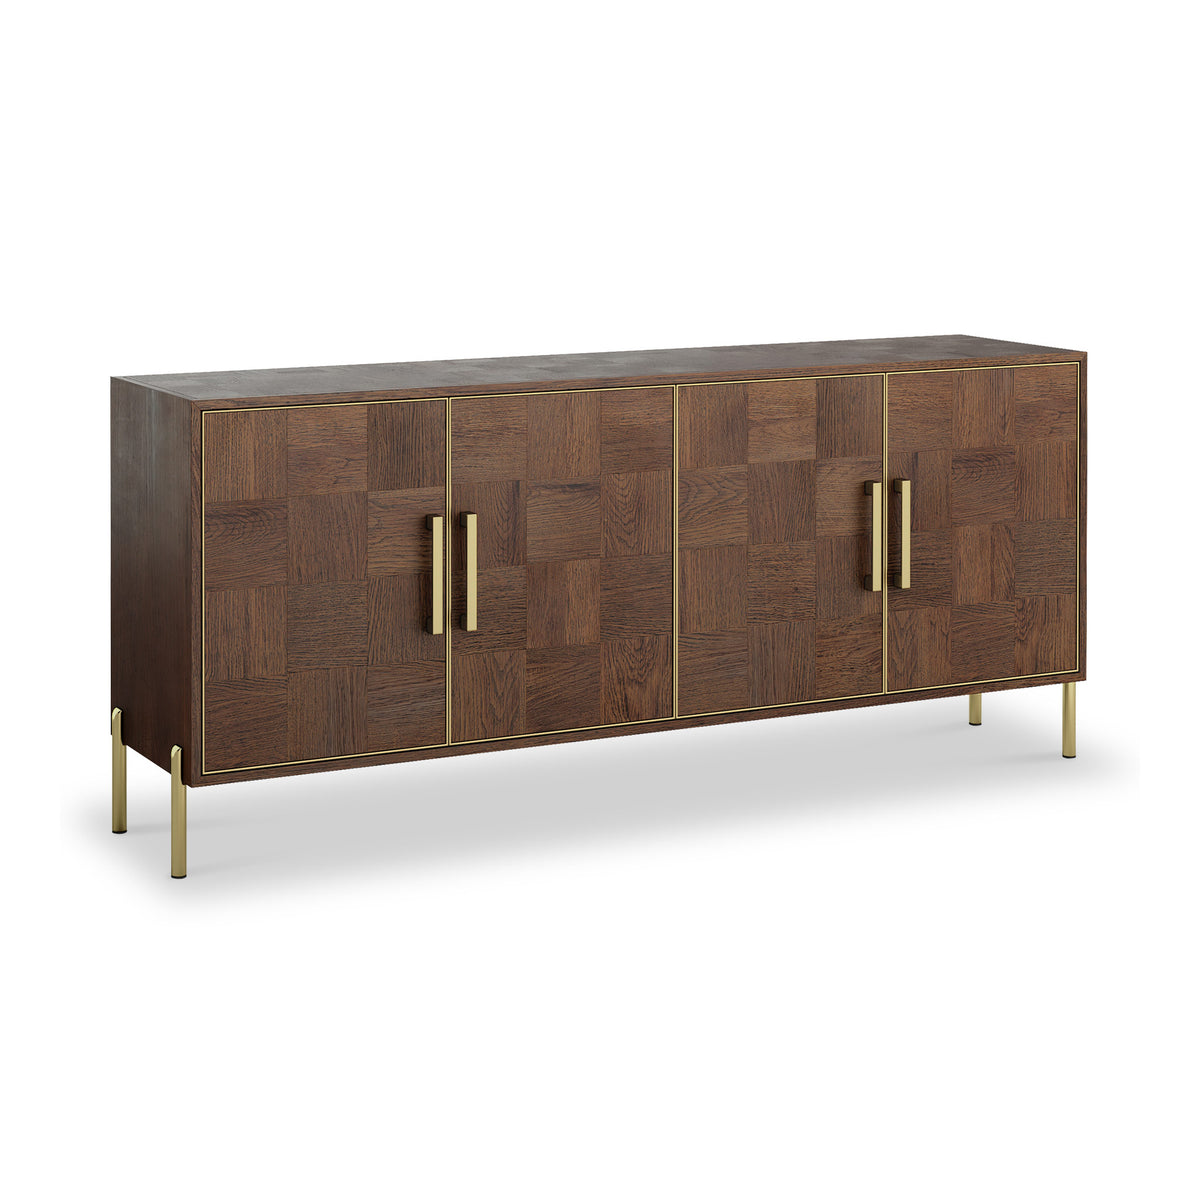 Moira Extra Large Sideboard from Roseland Furniture